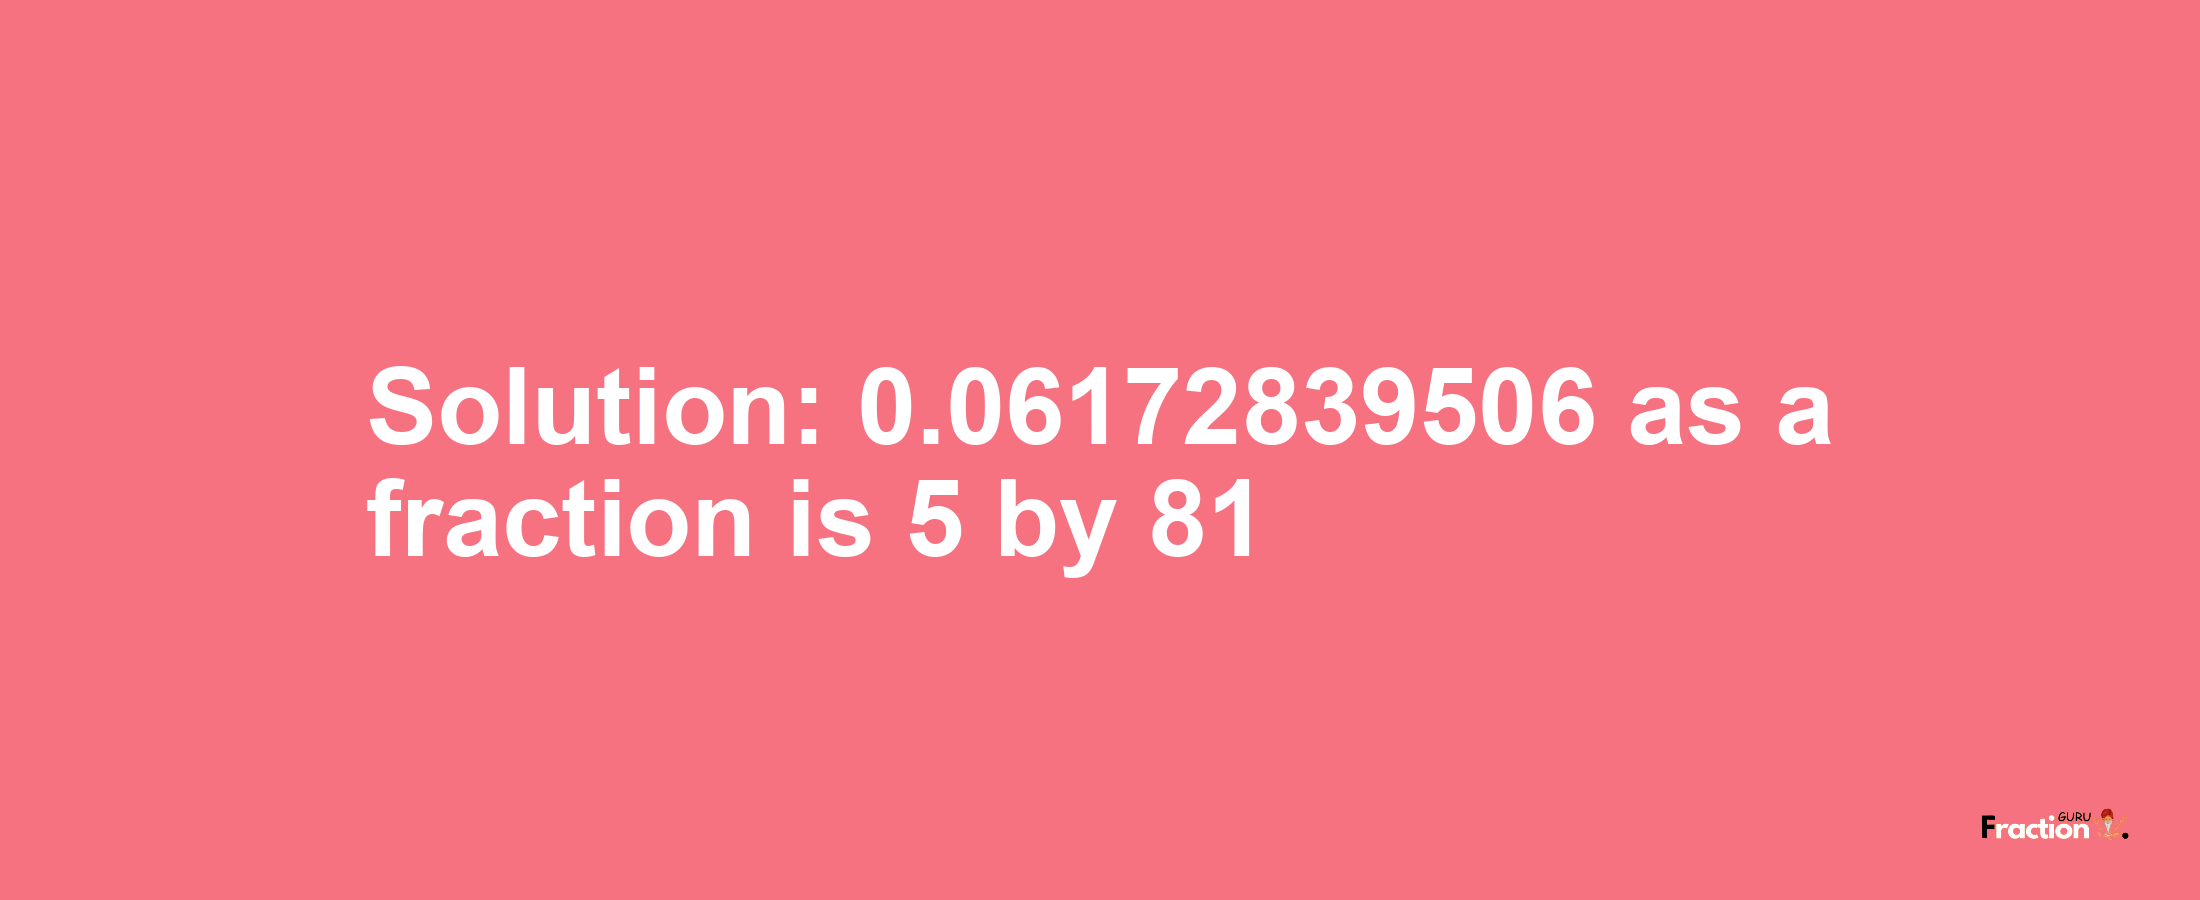 Solution:0.06172839506 as a fraction is 5/81